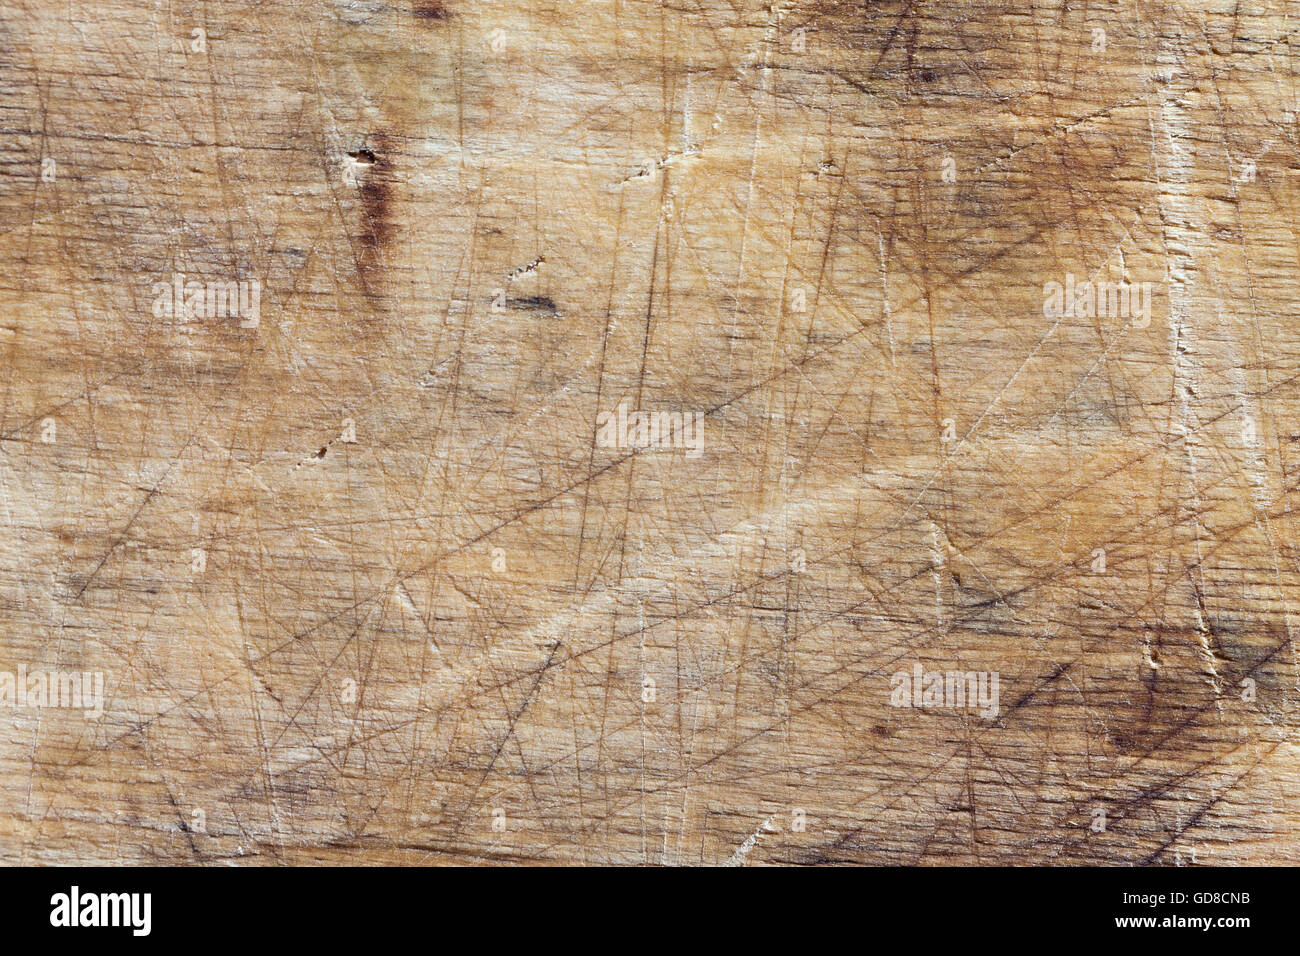 Texture of dark wood use as natural background Stock Photo